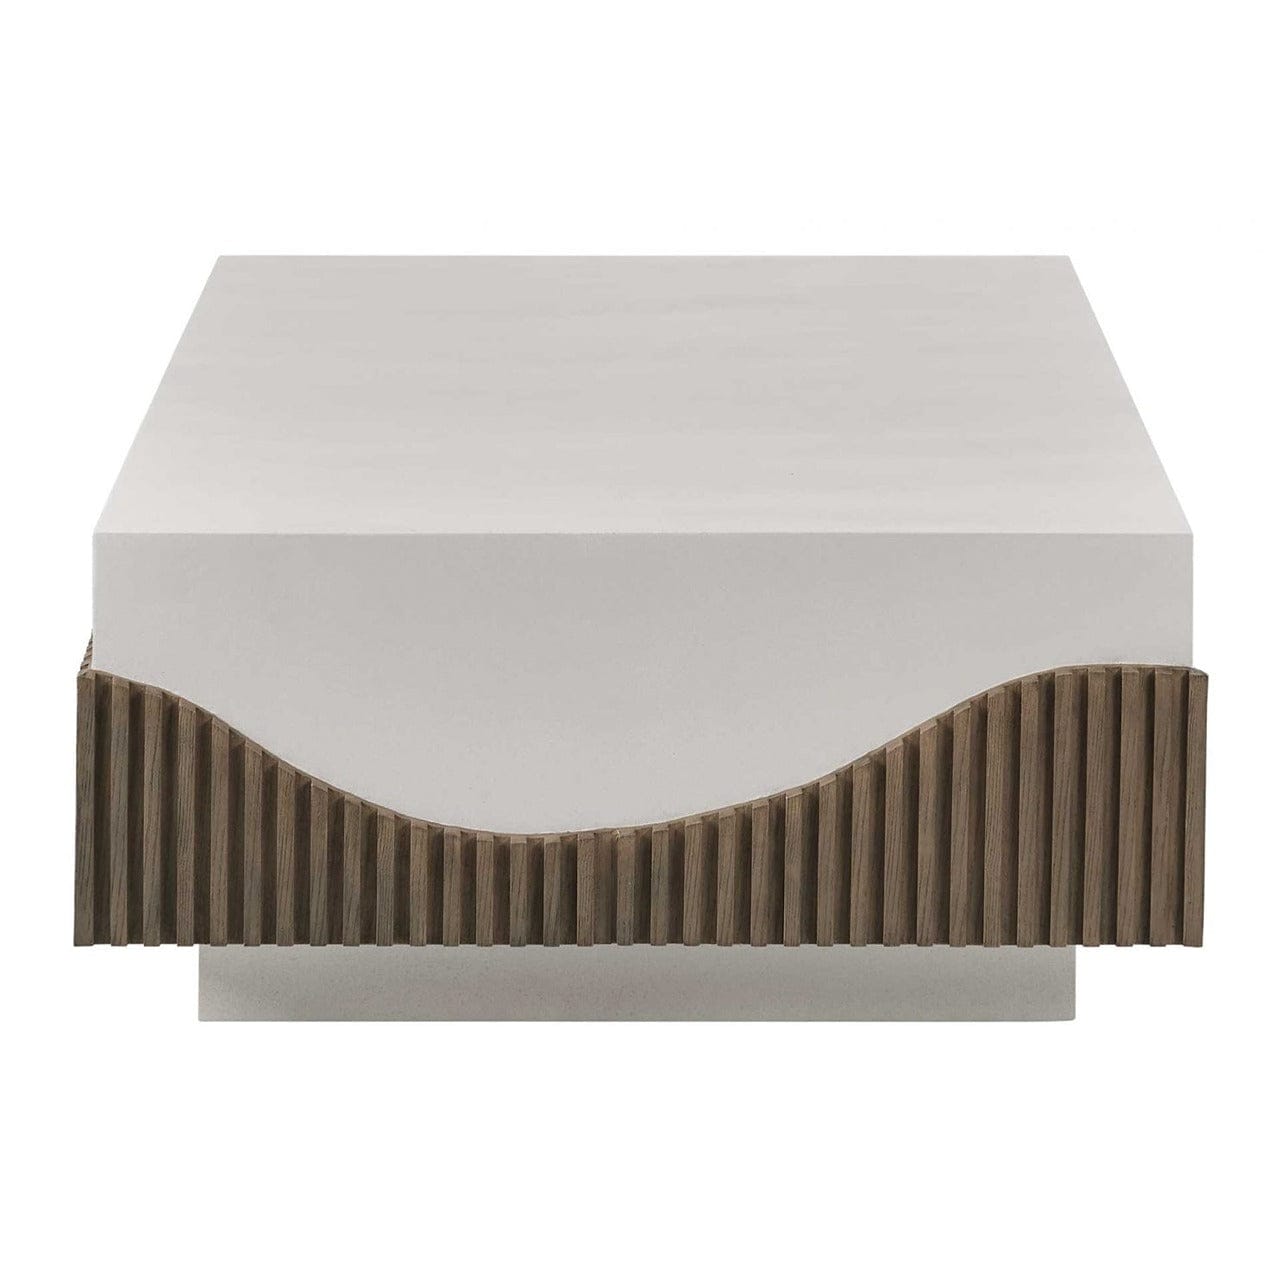 Tranquility Rectangle Coffee Table